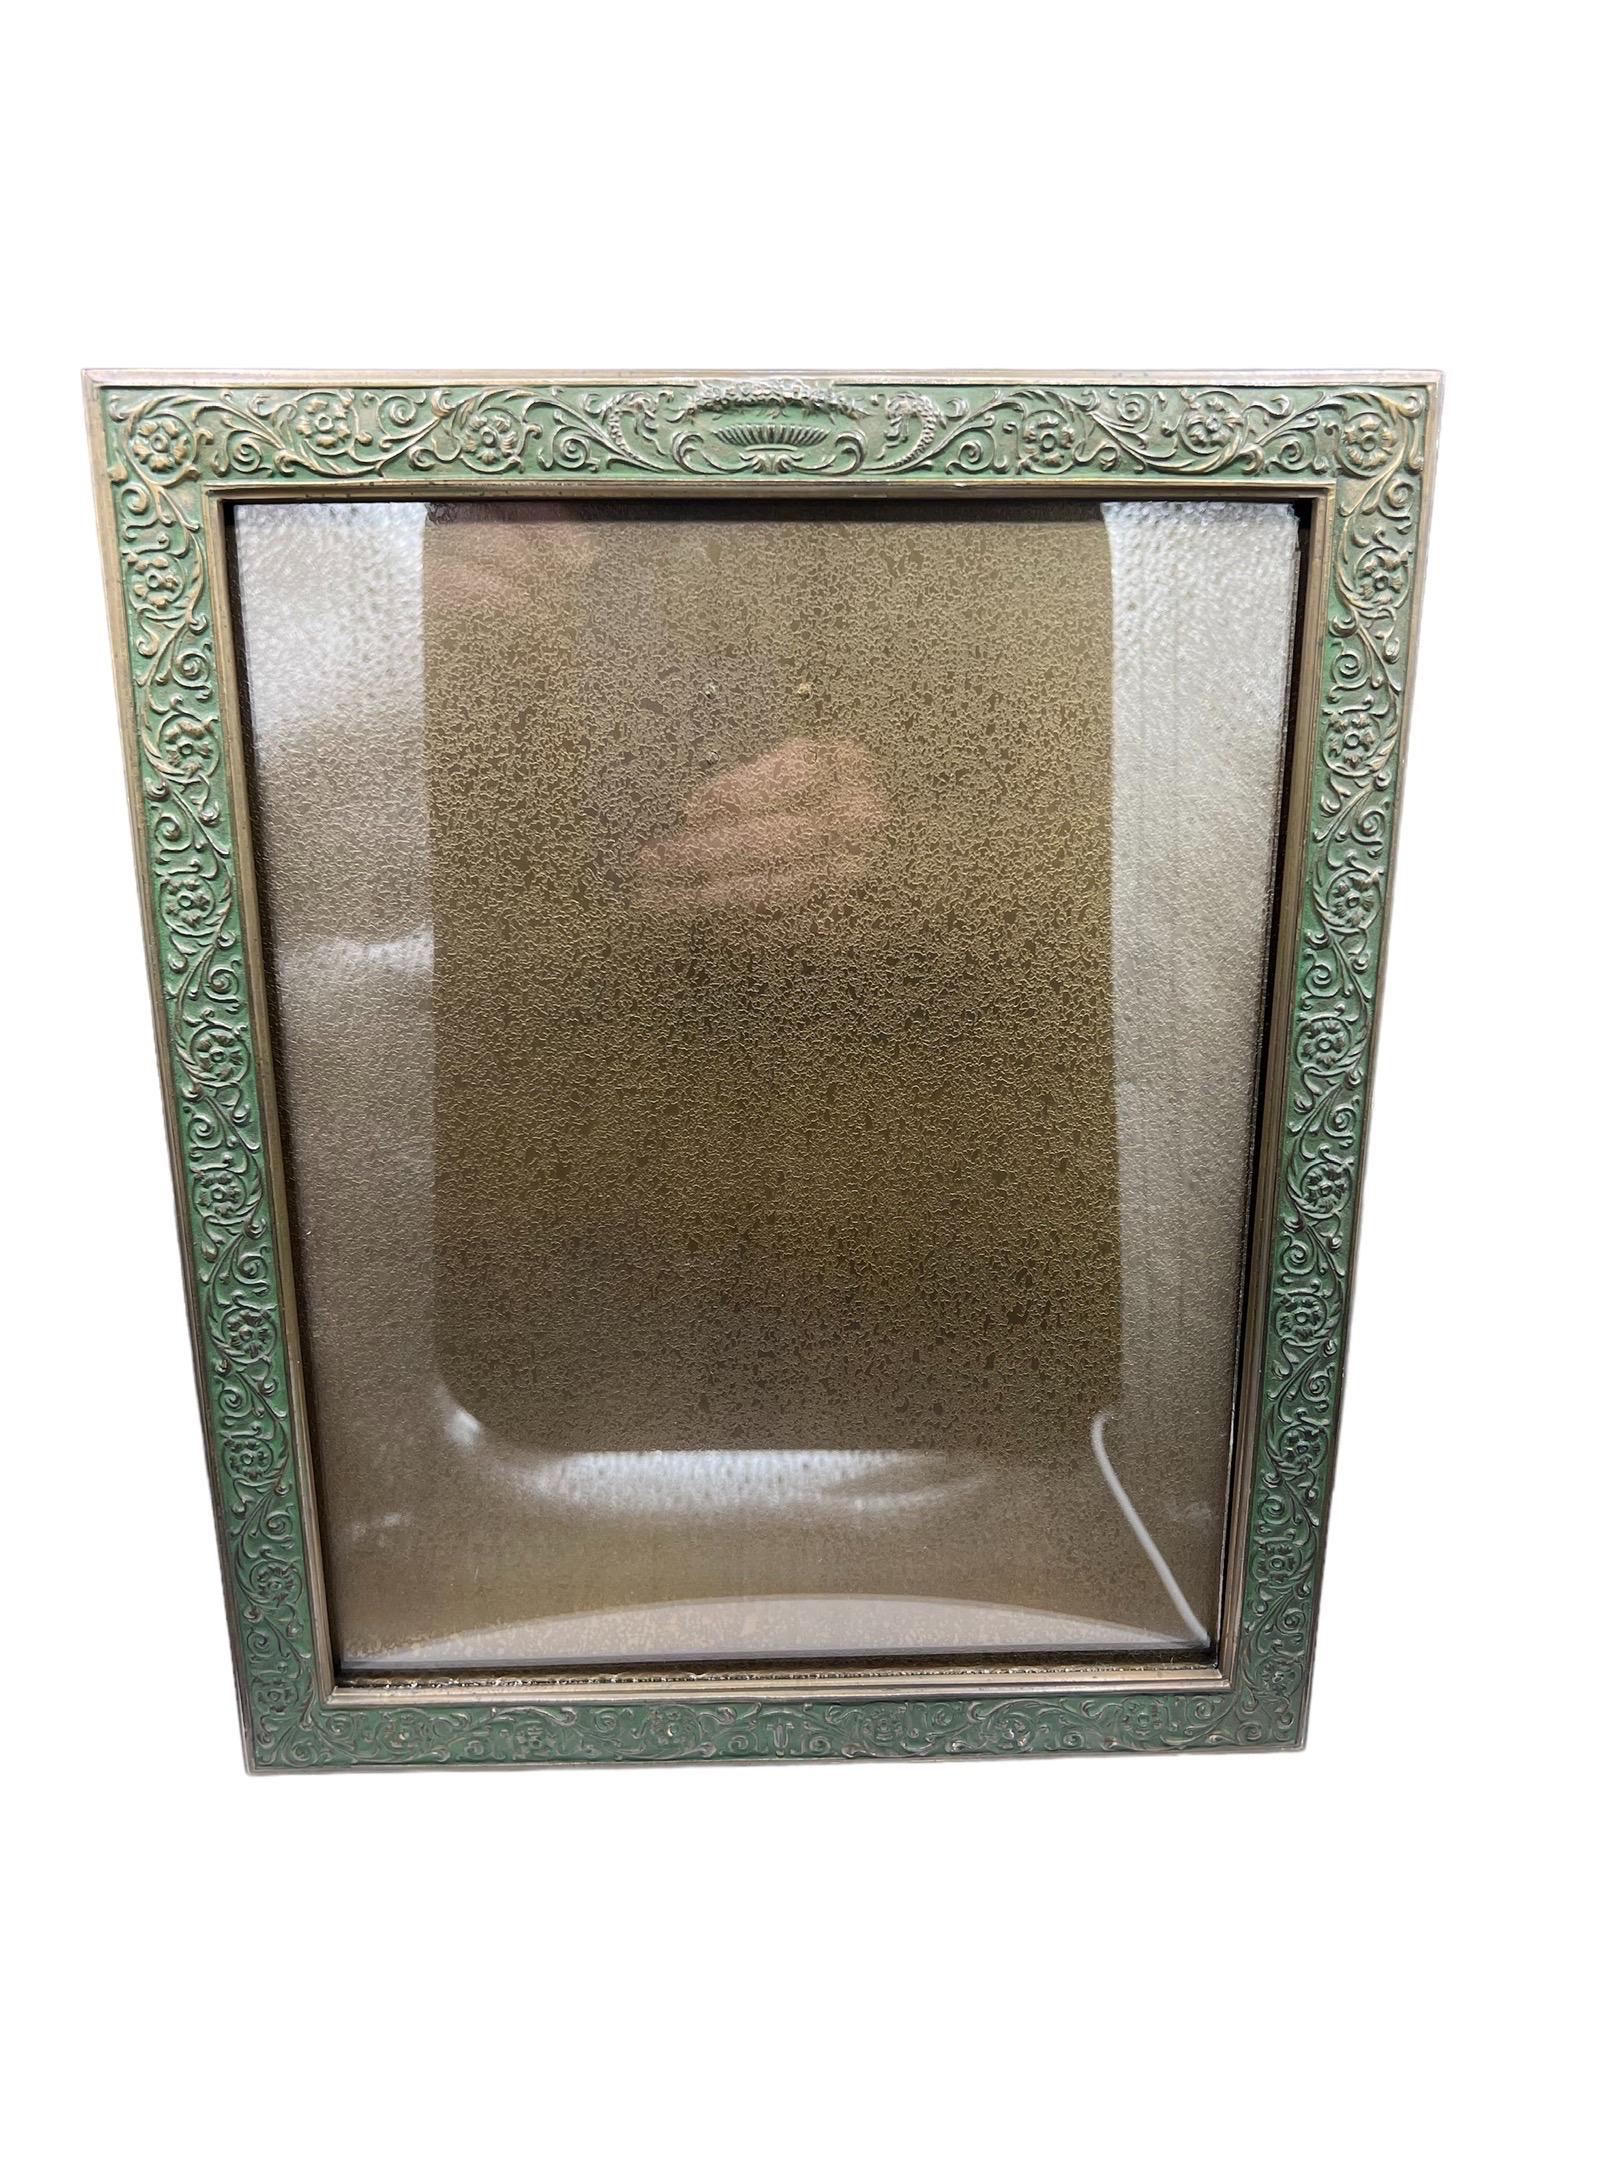 Tiffany Studios gilt-bronze picture frame, Stamped Tiffany Studios/NY/1611. For Sale 3